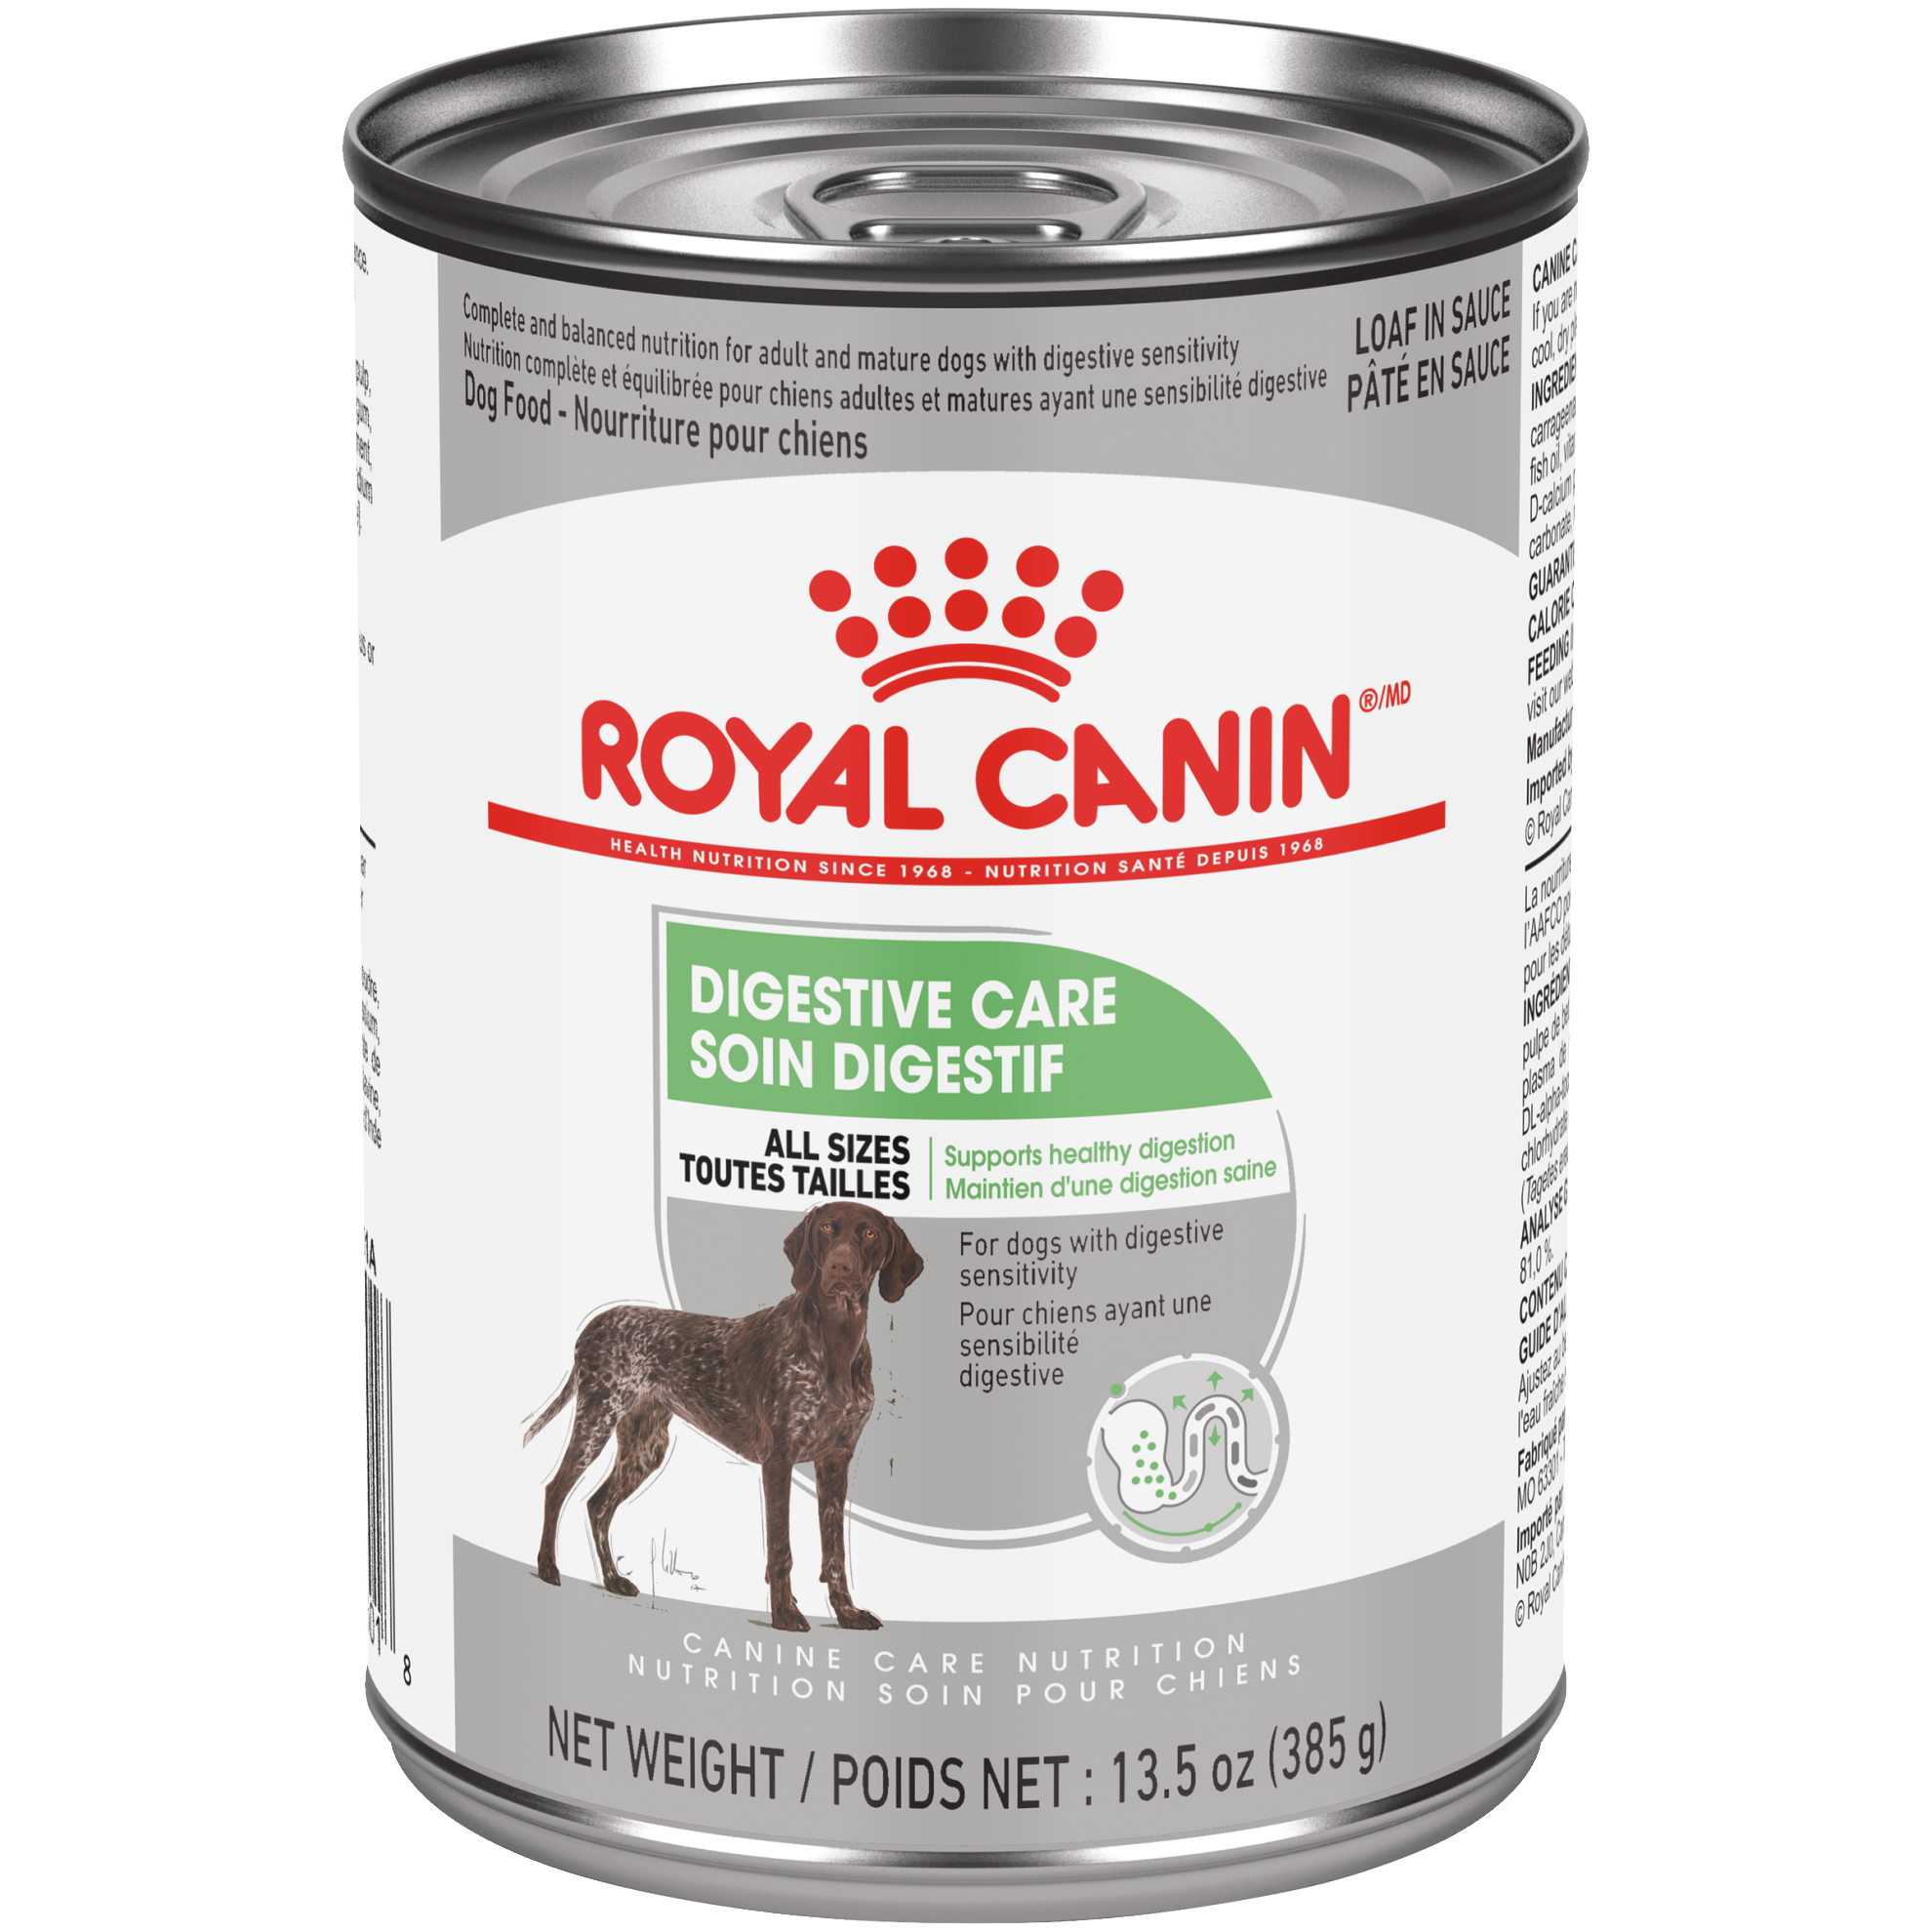 Digestive Care Loaf in Sauce Canned Dog Food